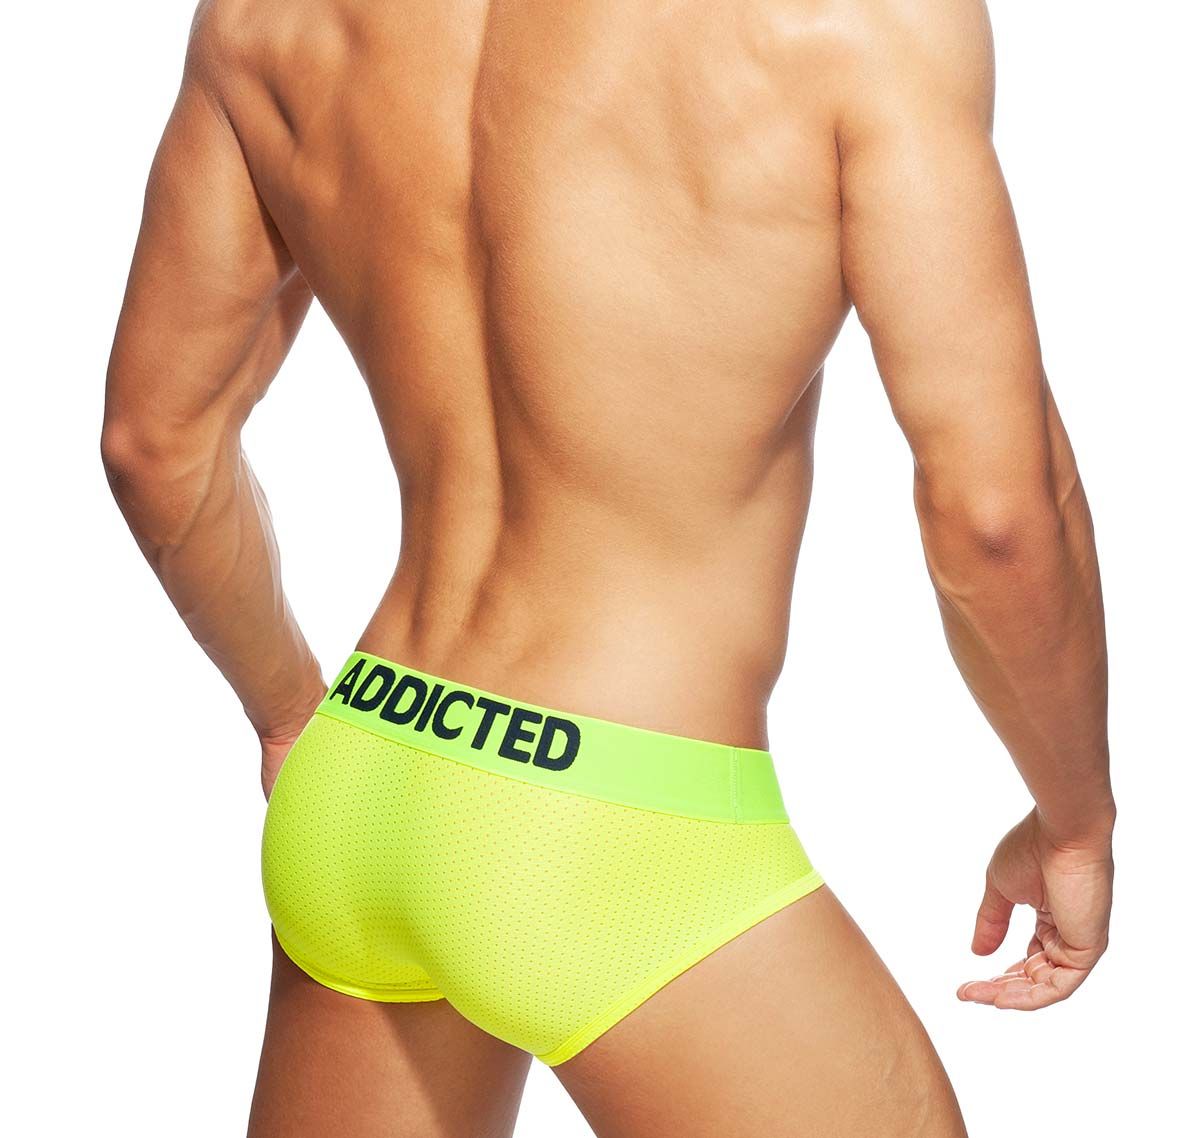 Addicted Brief RING UP NEON MESH BRIEF AD951, neon yellow